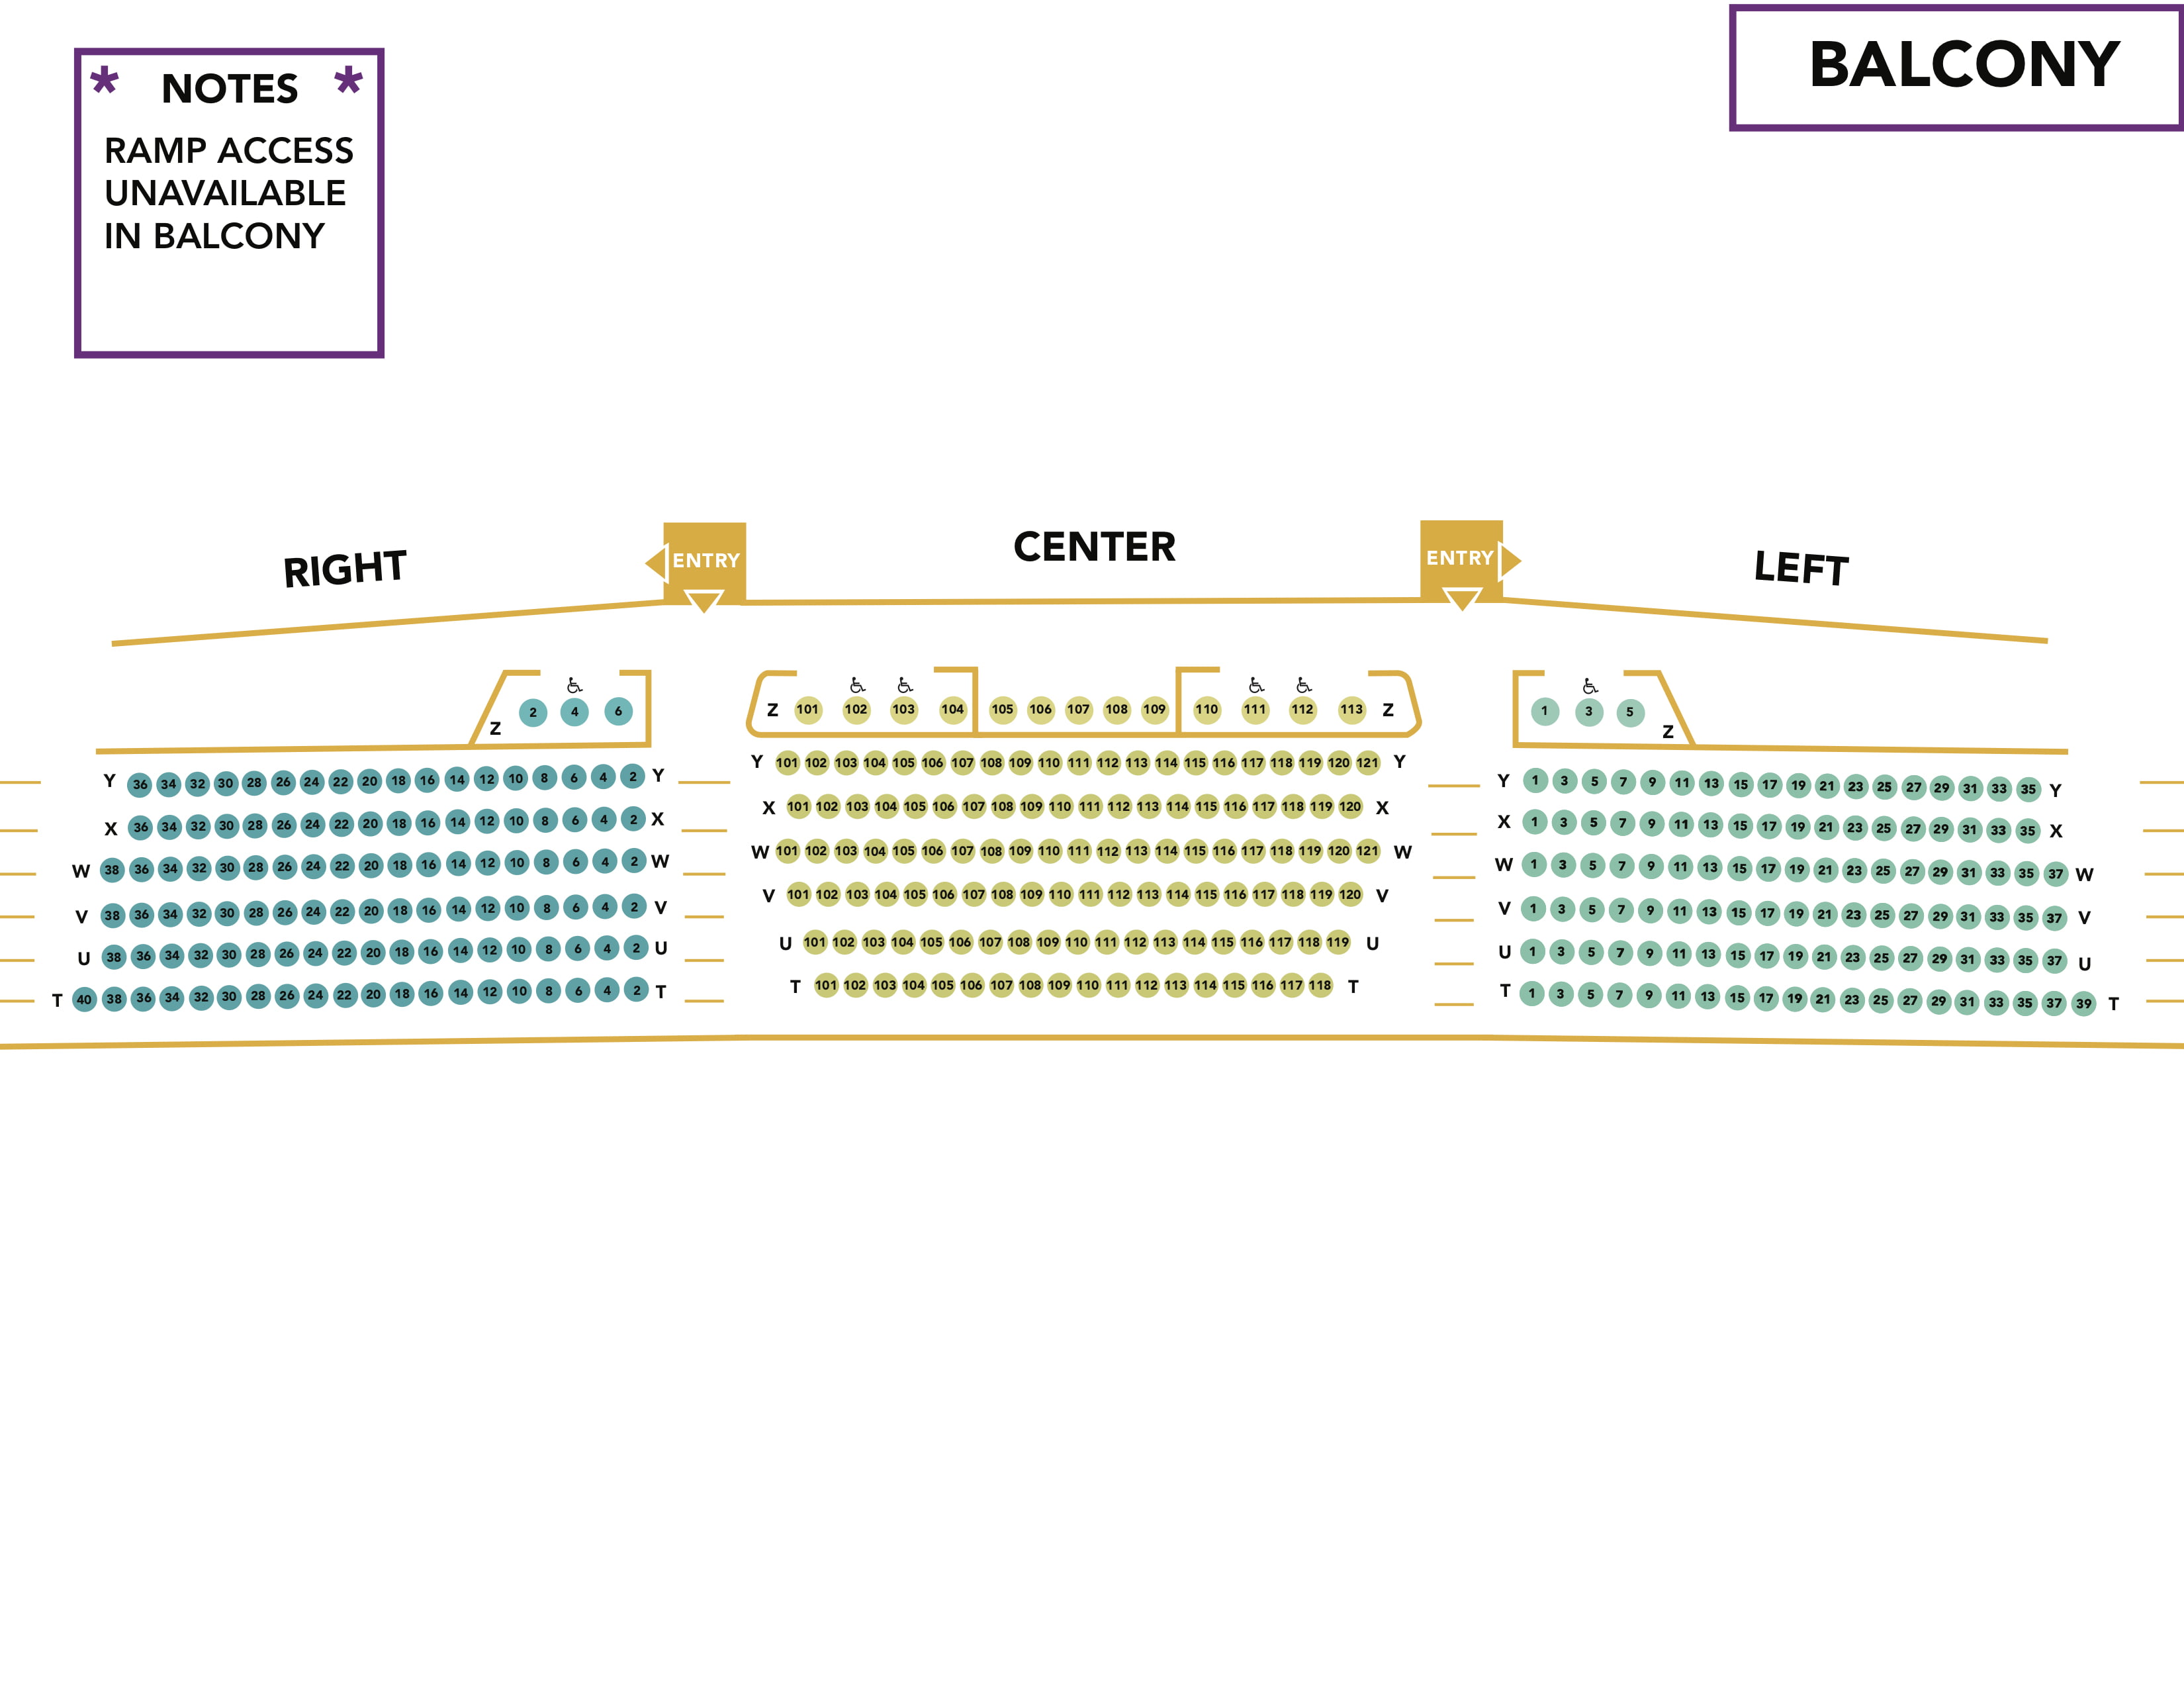 Venice Performing Arts Center Seating Chart